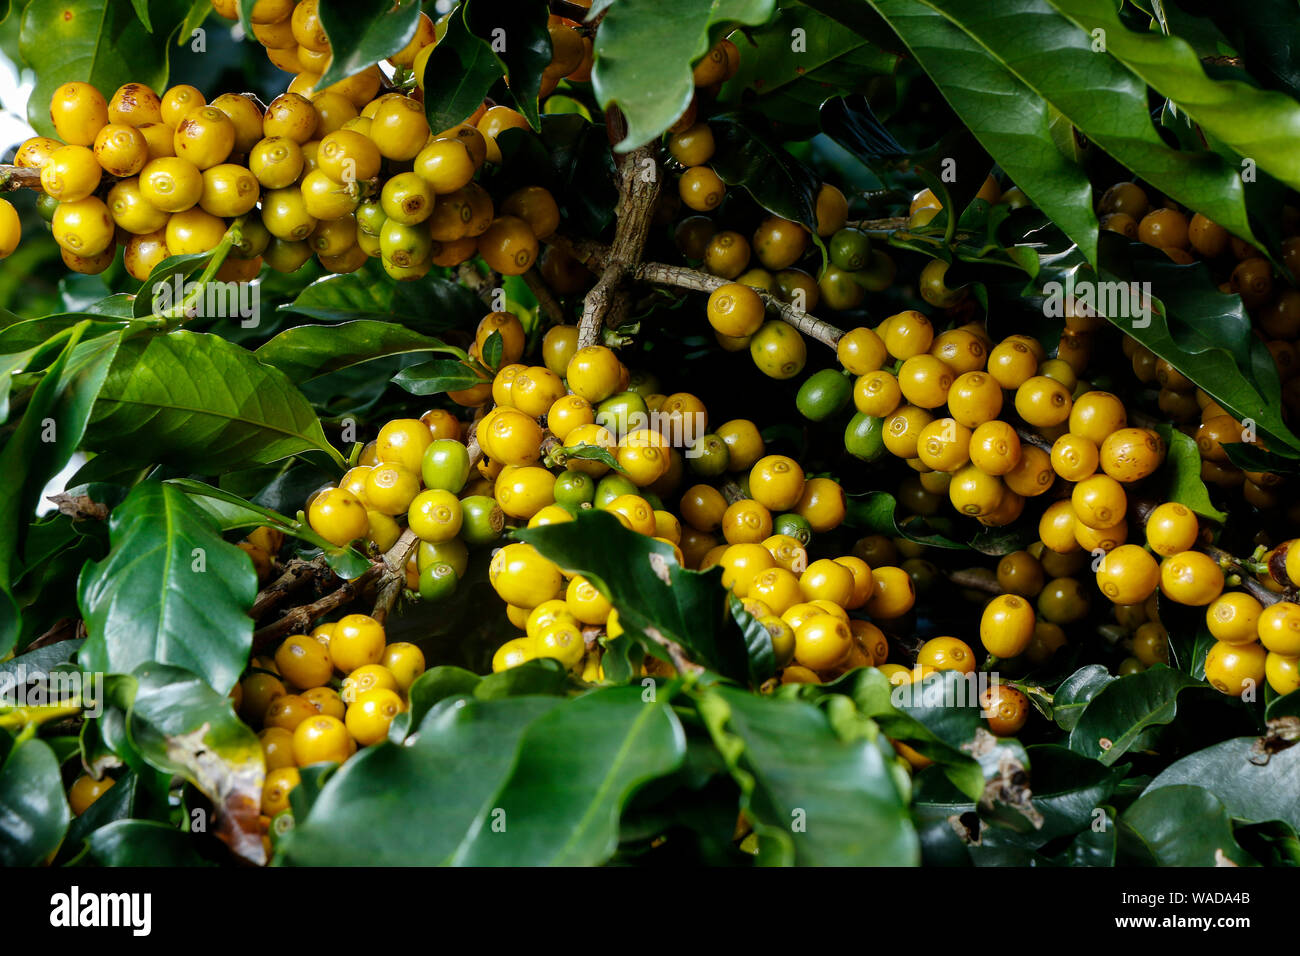 View farm with coffee plantation. Agribusiness. Coffee crop with yellow grains, green foliage and blue sky. Stock Photo